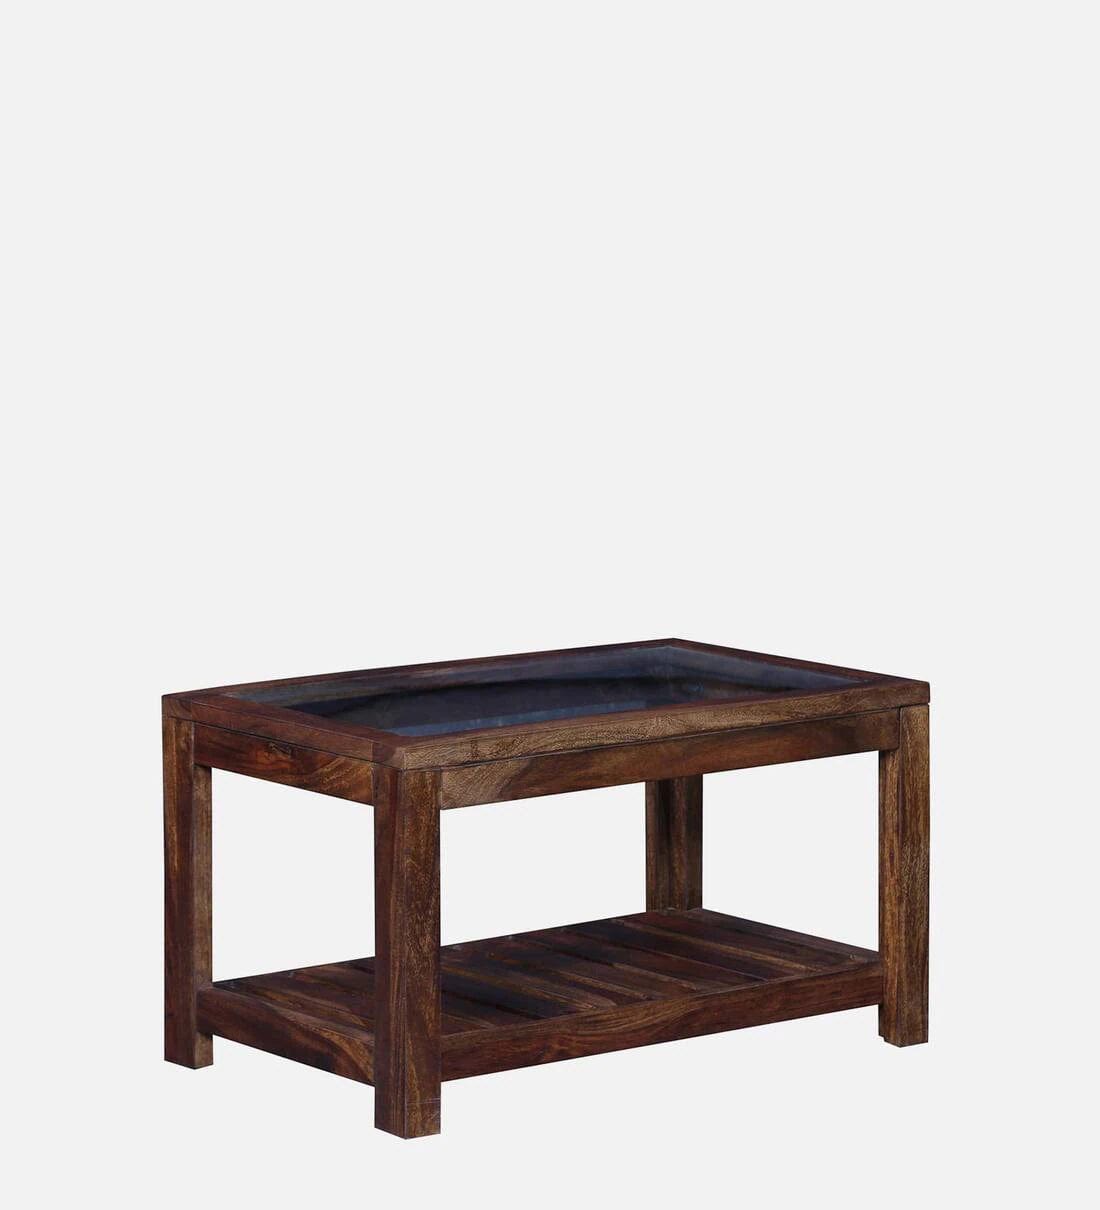 Stigen Sheesham Wood Coffee Table In Provincial Teak Finish With Glass Top,